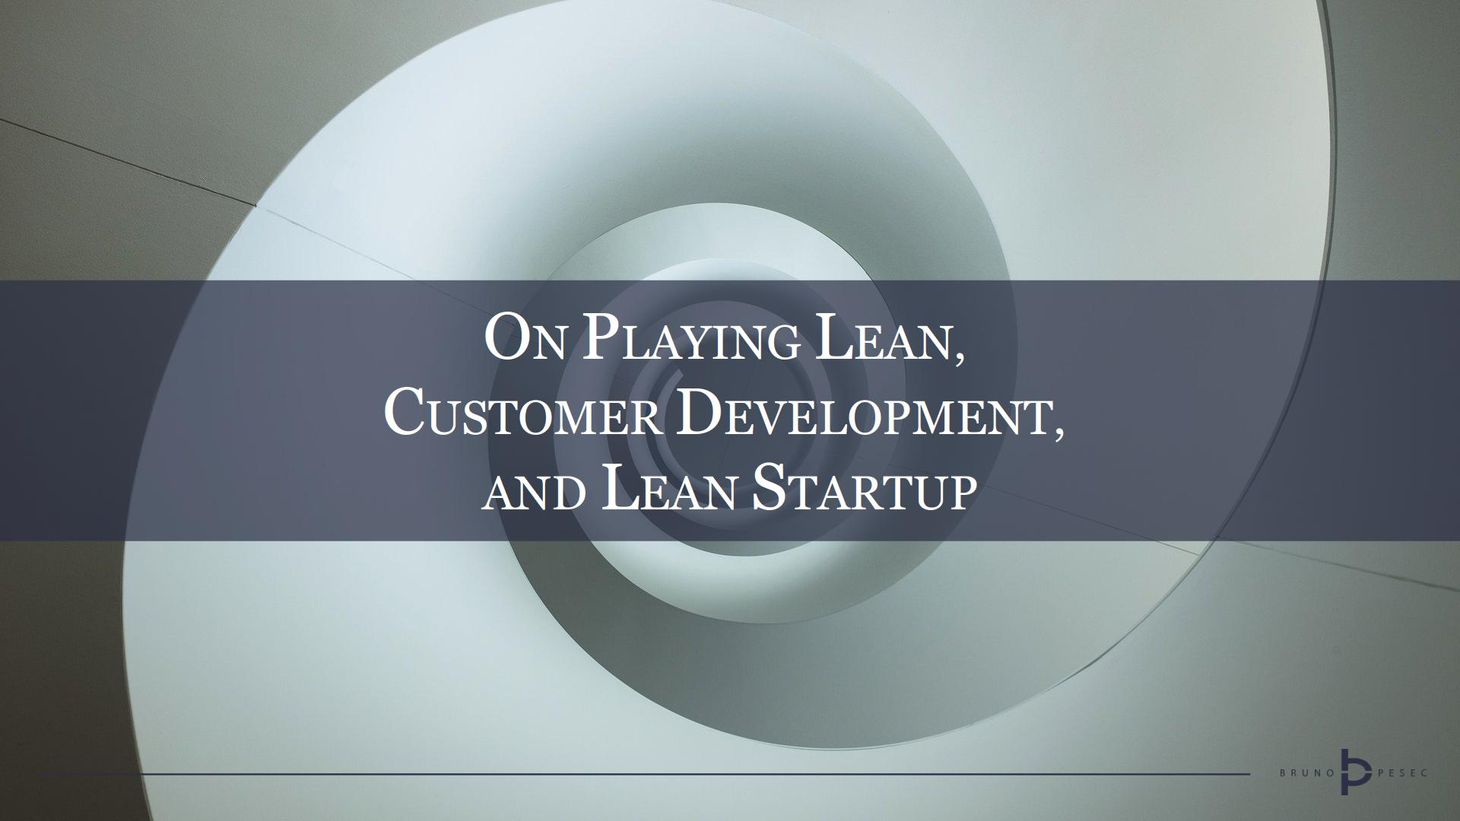 On Playing Lean, customer development, and lean startup